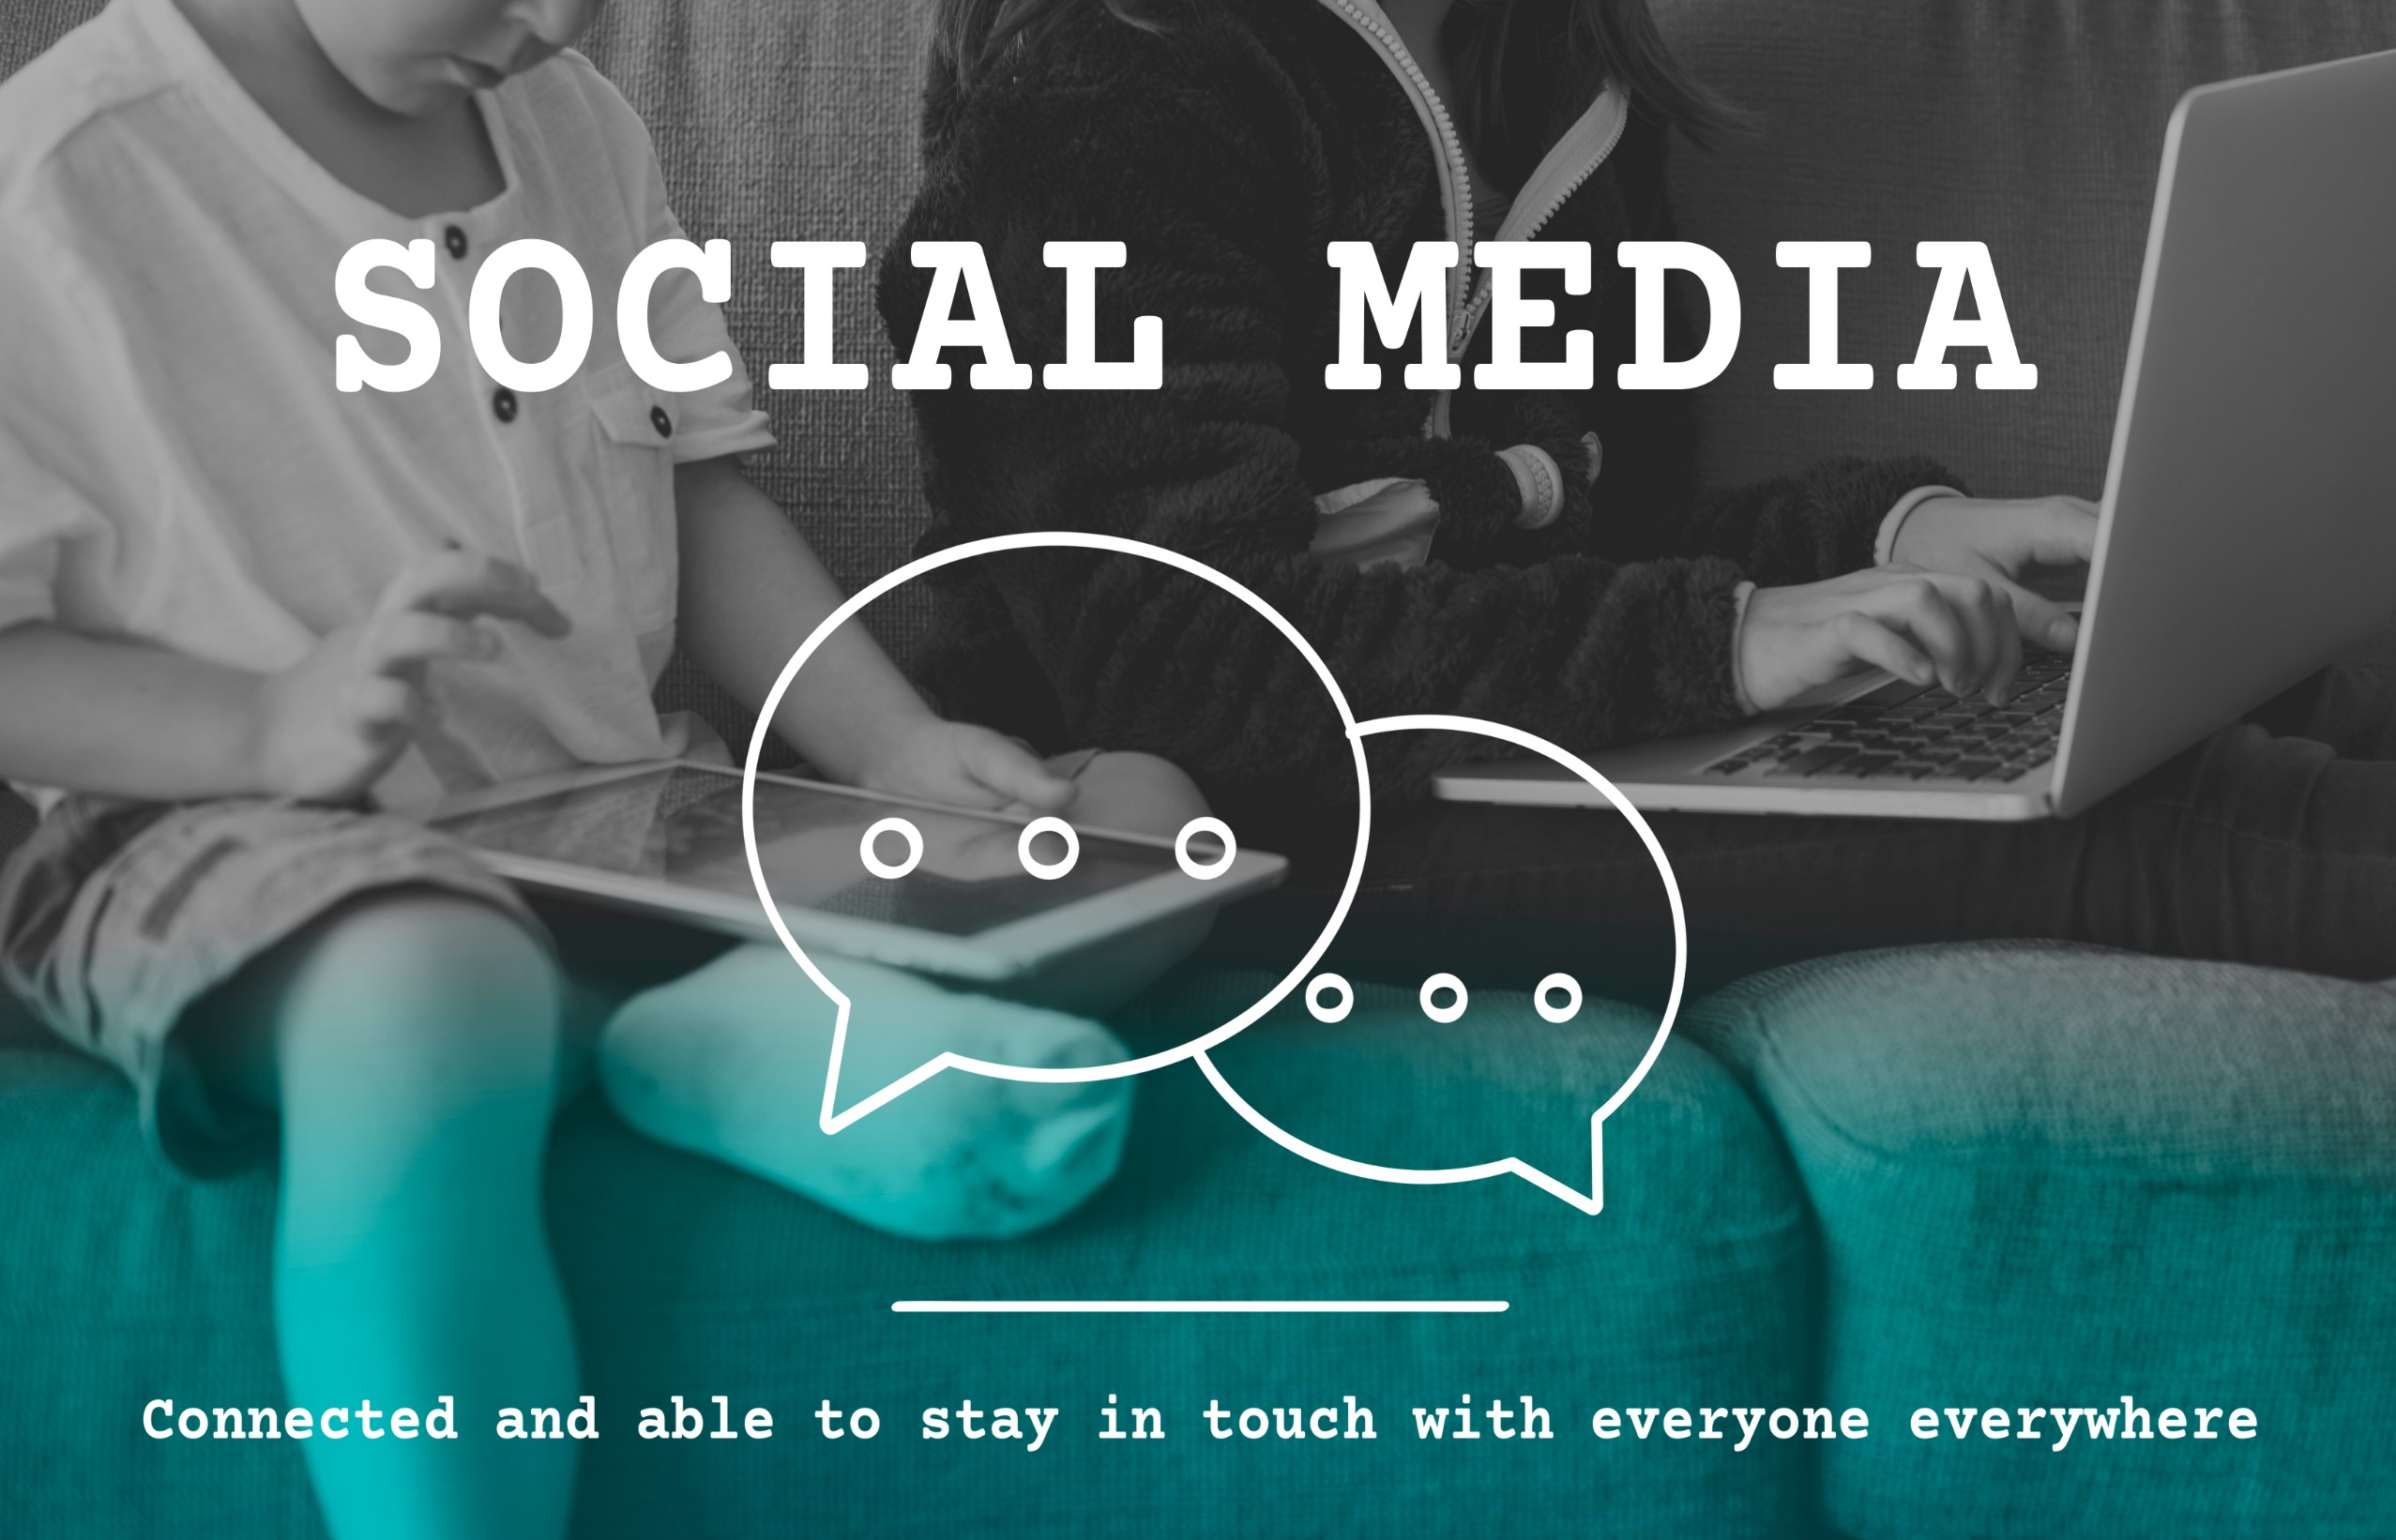 We’ll take care of all your social media marketing needs 